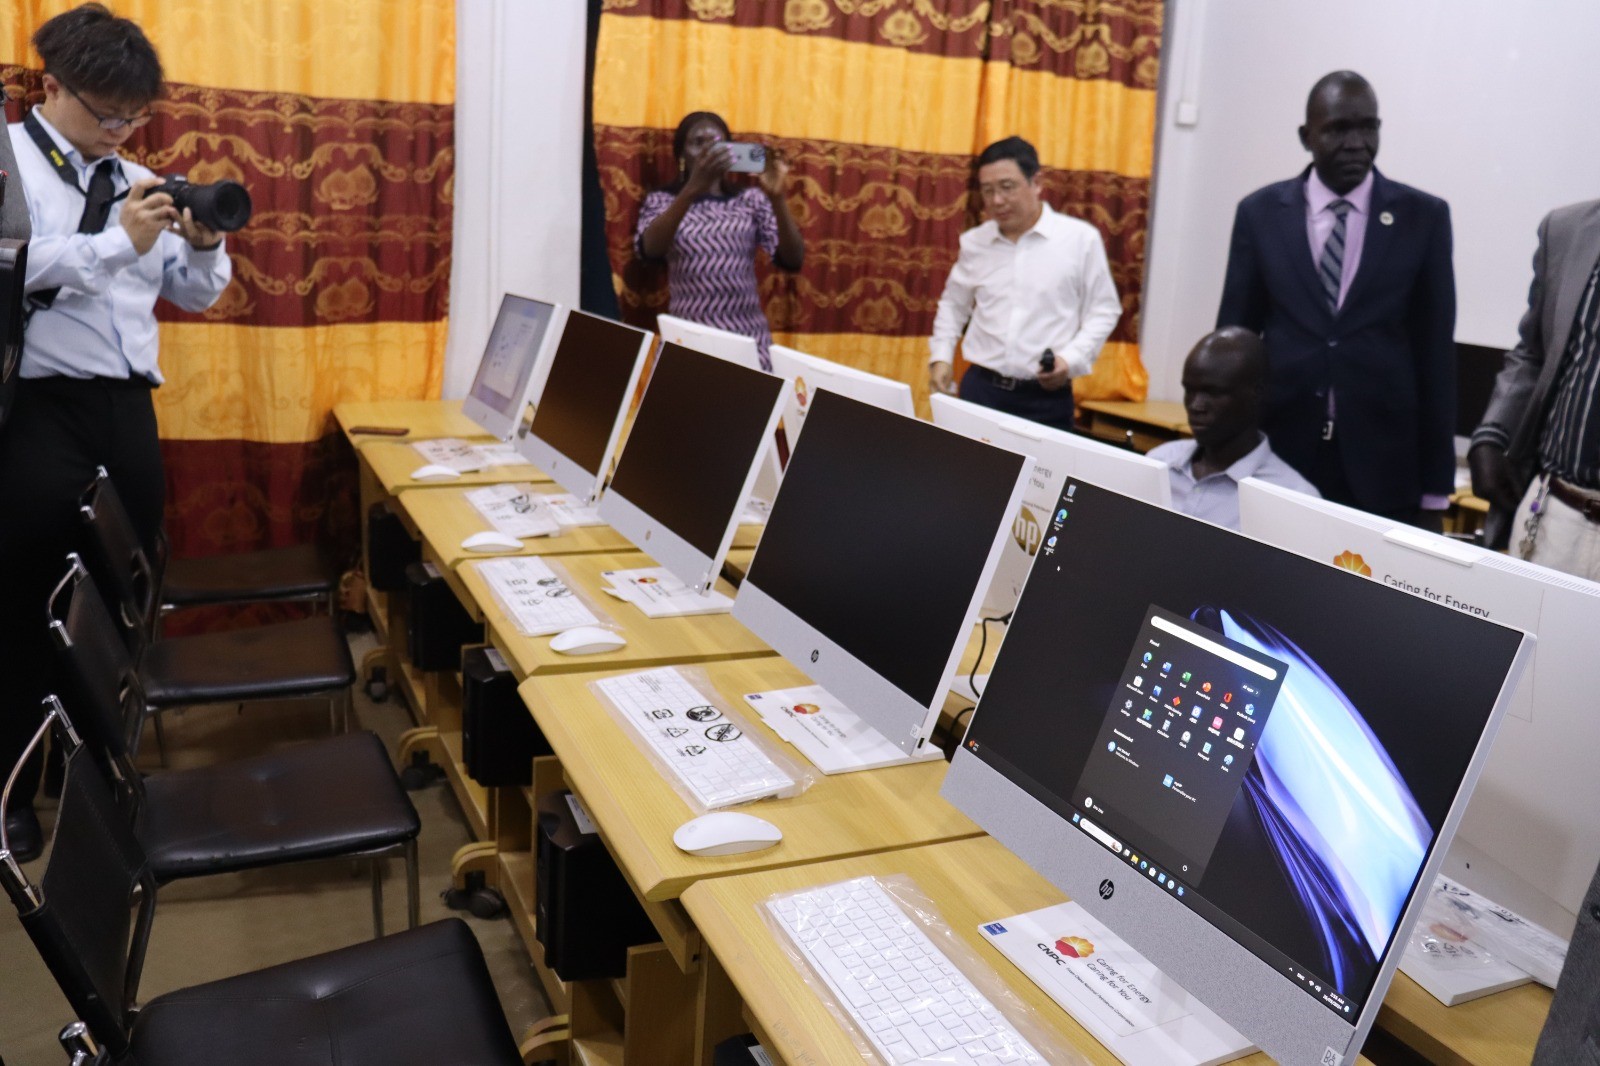 Chinese oil firm CNPC donates 45 computers to University of Juba